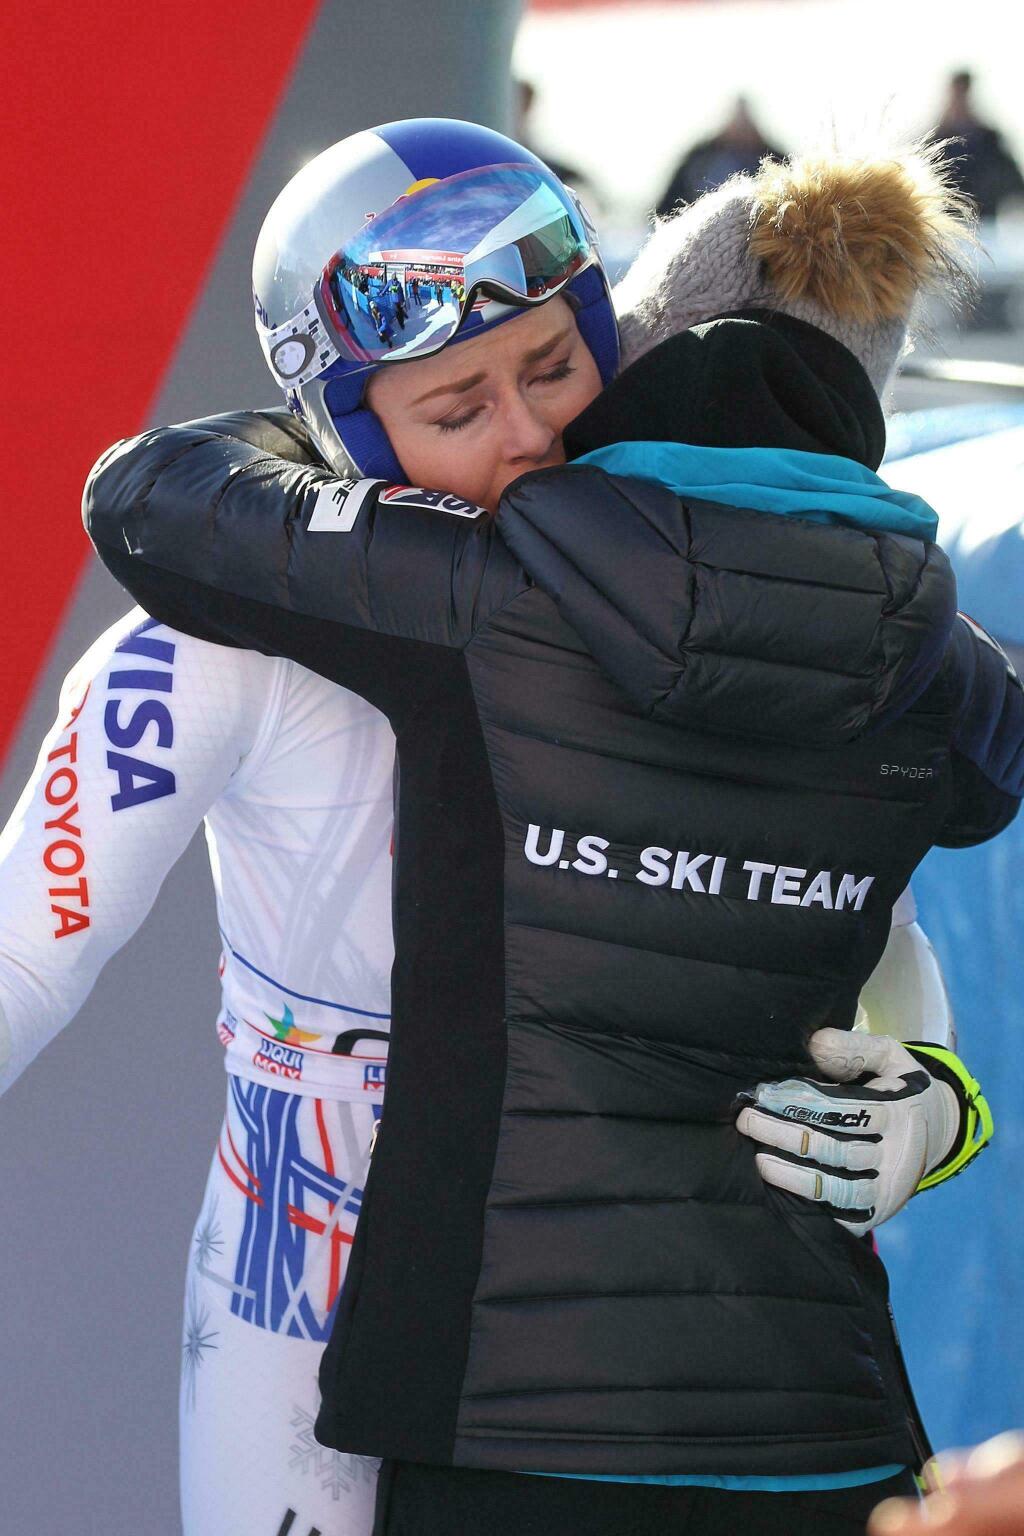 In this Sunday, Jan. 20, 2019 file photo, the United States' Lindsey Vonn hugs a U.S. team staffer in the finish area of the women's World Cup super-G race in Cortina D'Ampezzo, Italy. (Andrea Solero/ANSA via AP)